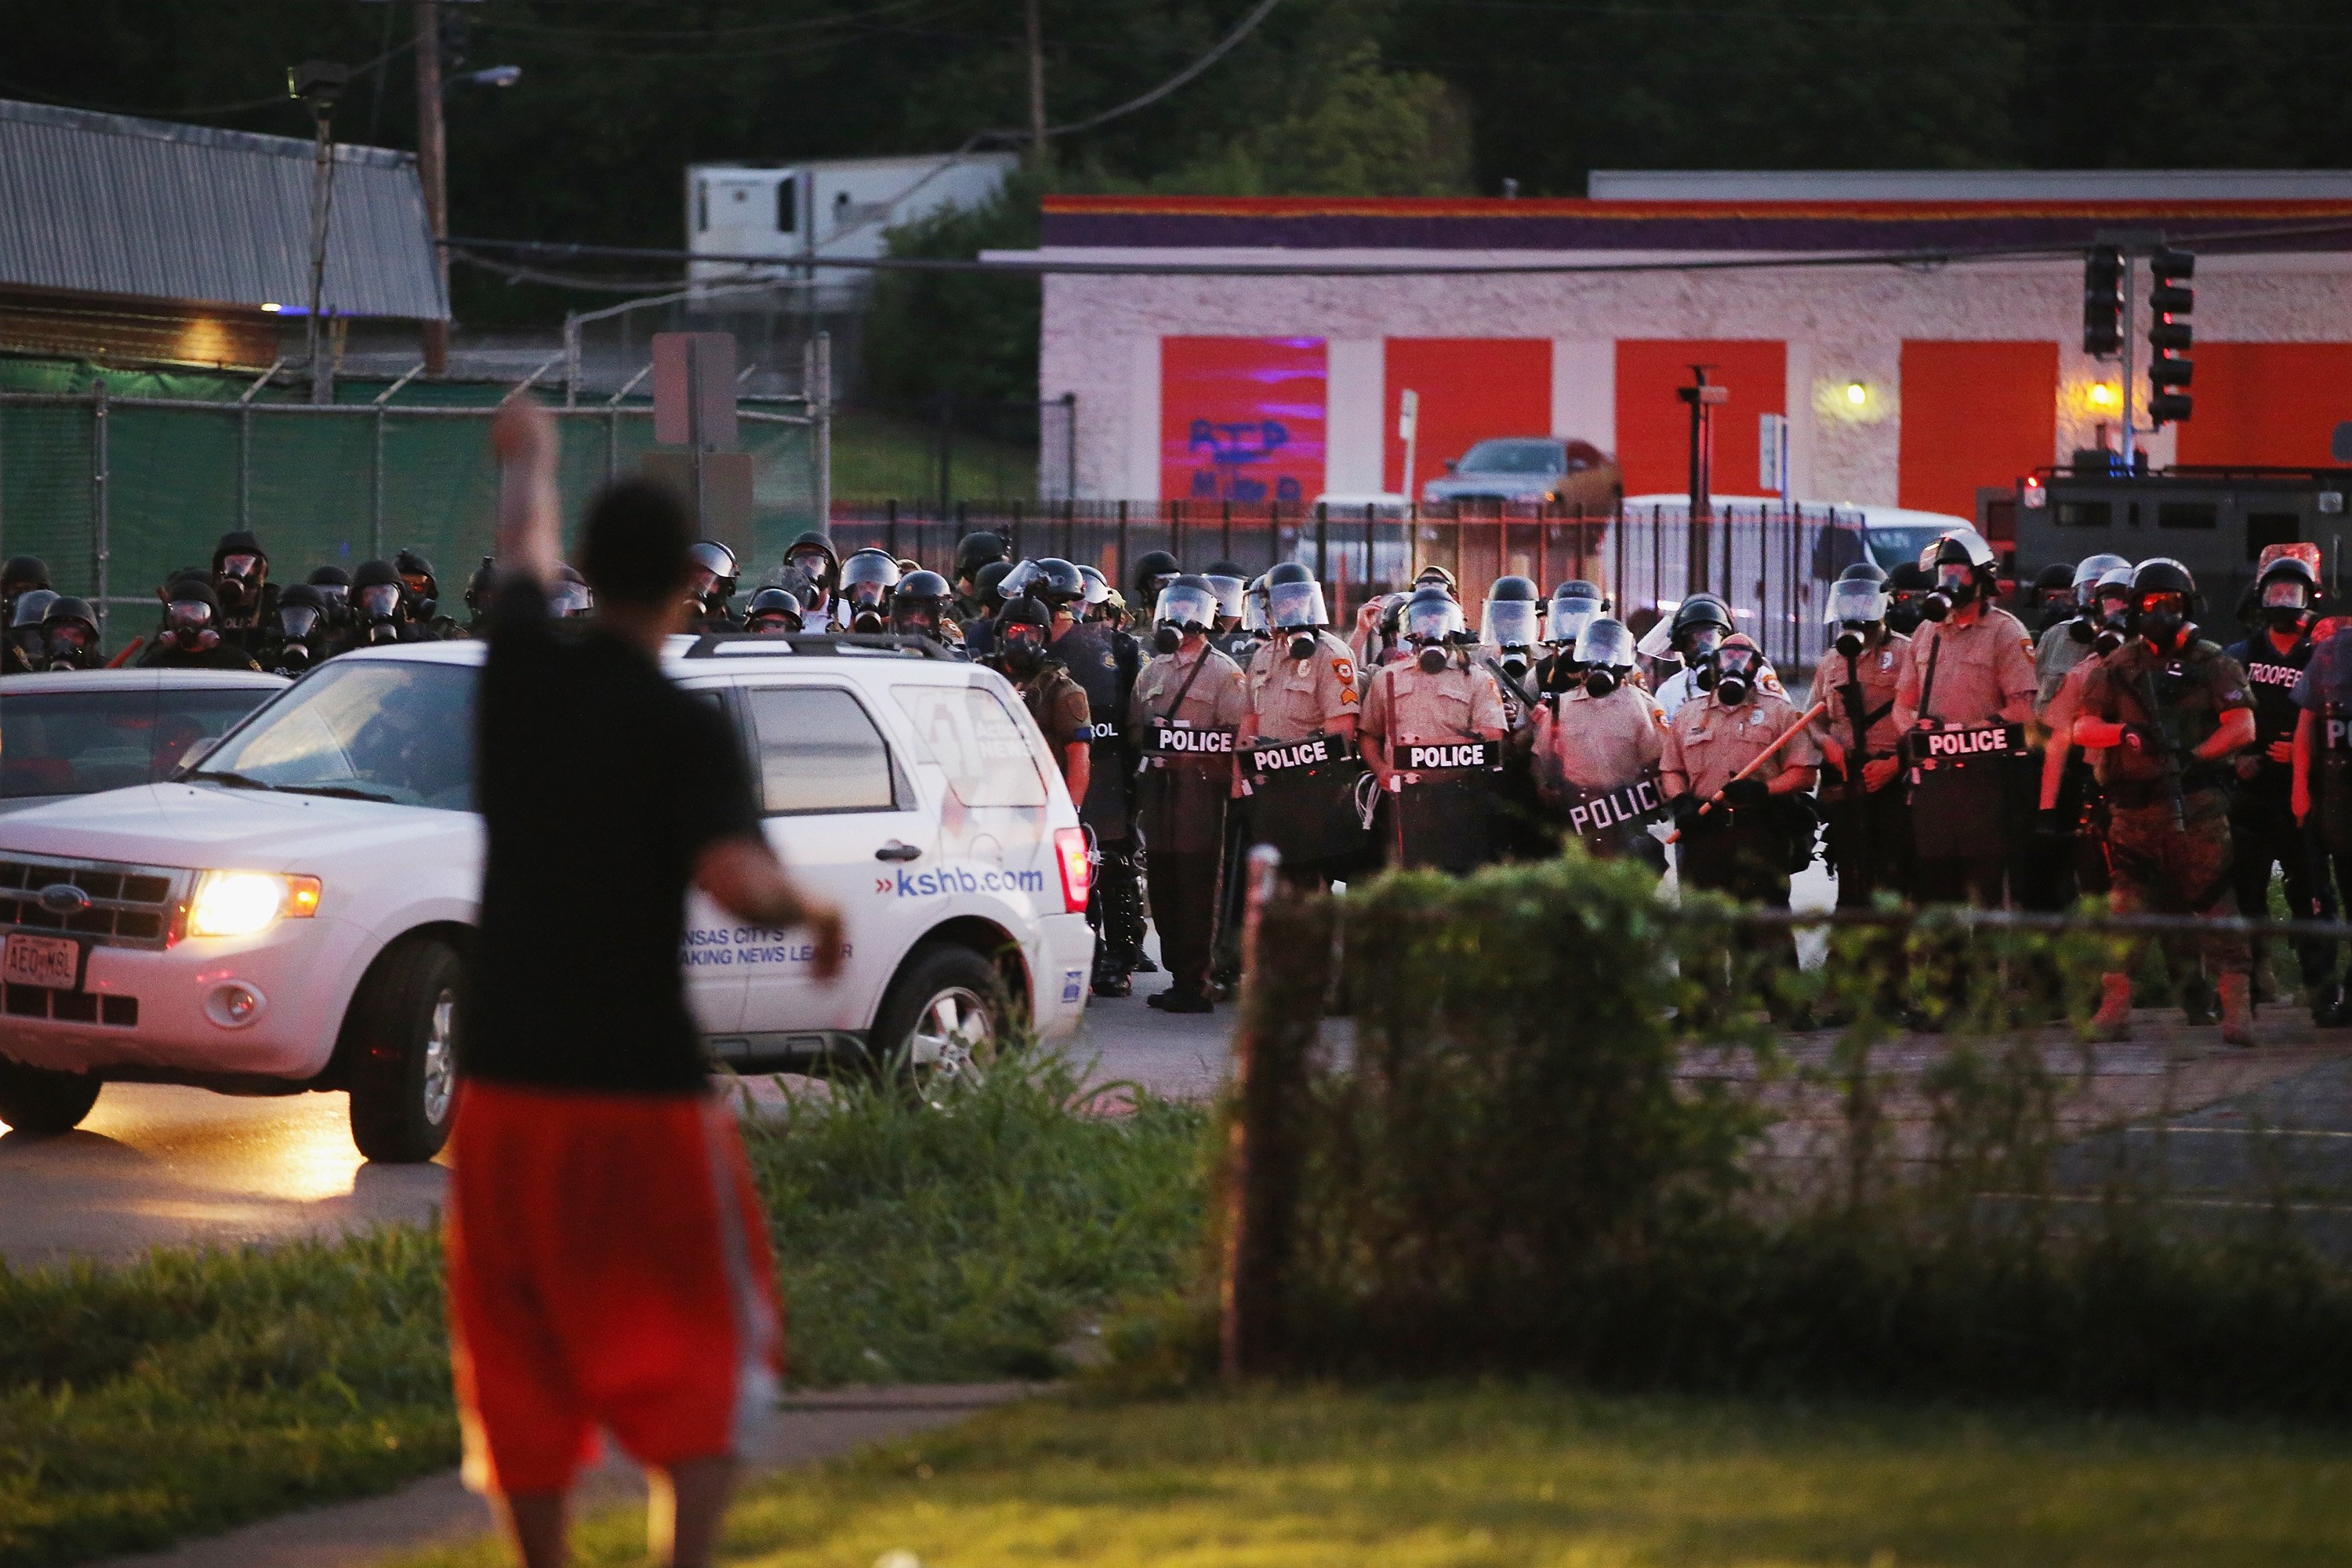 Riot police force protestors from the business district into nearby neighborhoods in Ferguson, Mo. on Aug. 11, 2014.